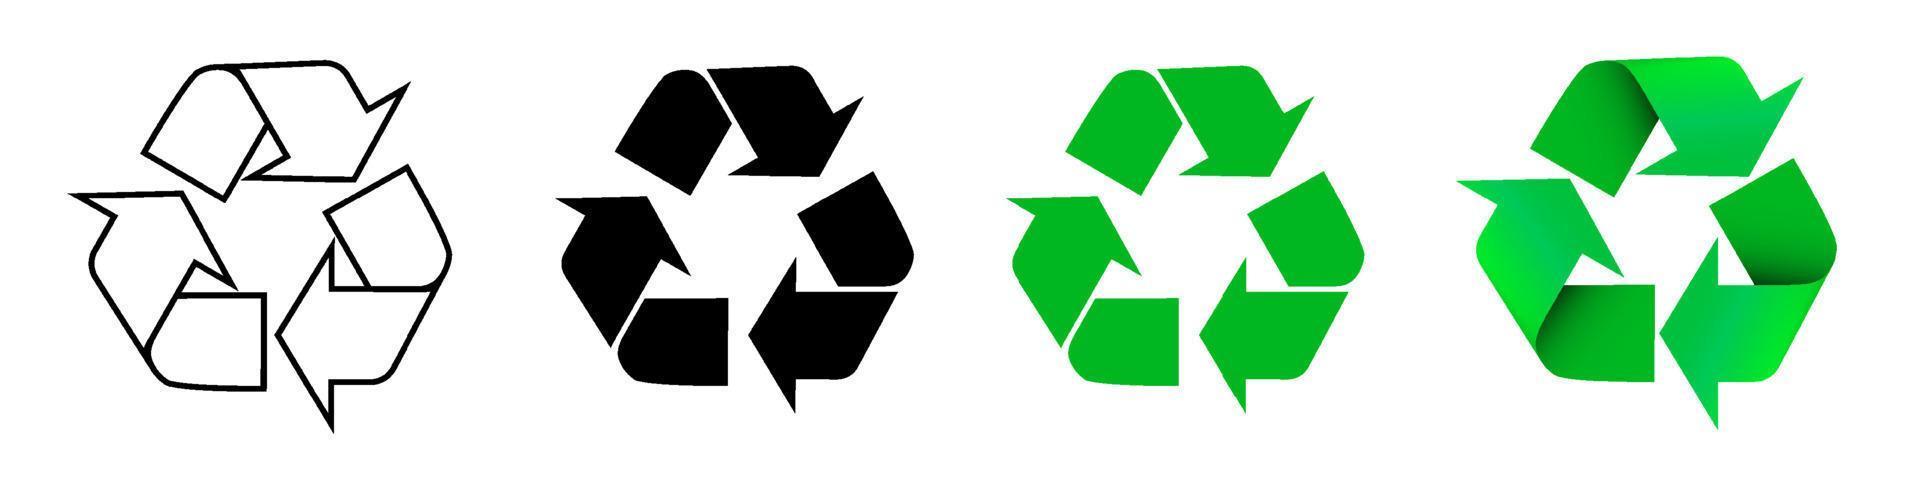 set of arrow signs for recycling waste, used raw materials. Caring for the environment. Green modern technologies. Isolated vector on white background